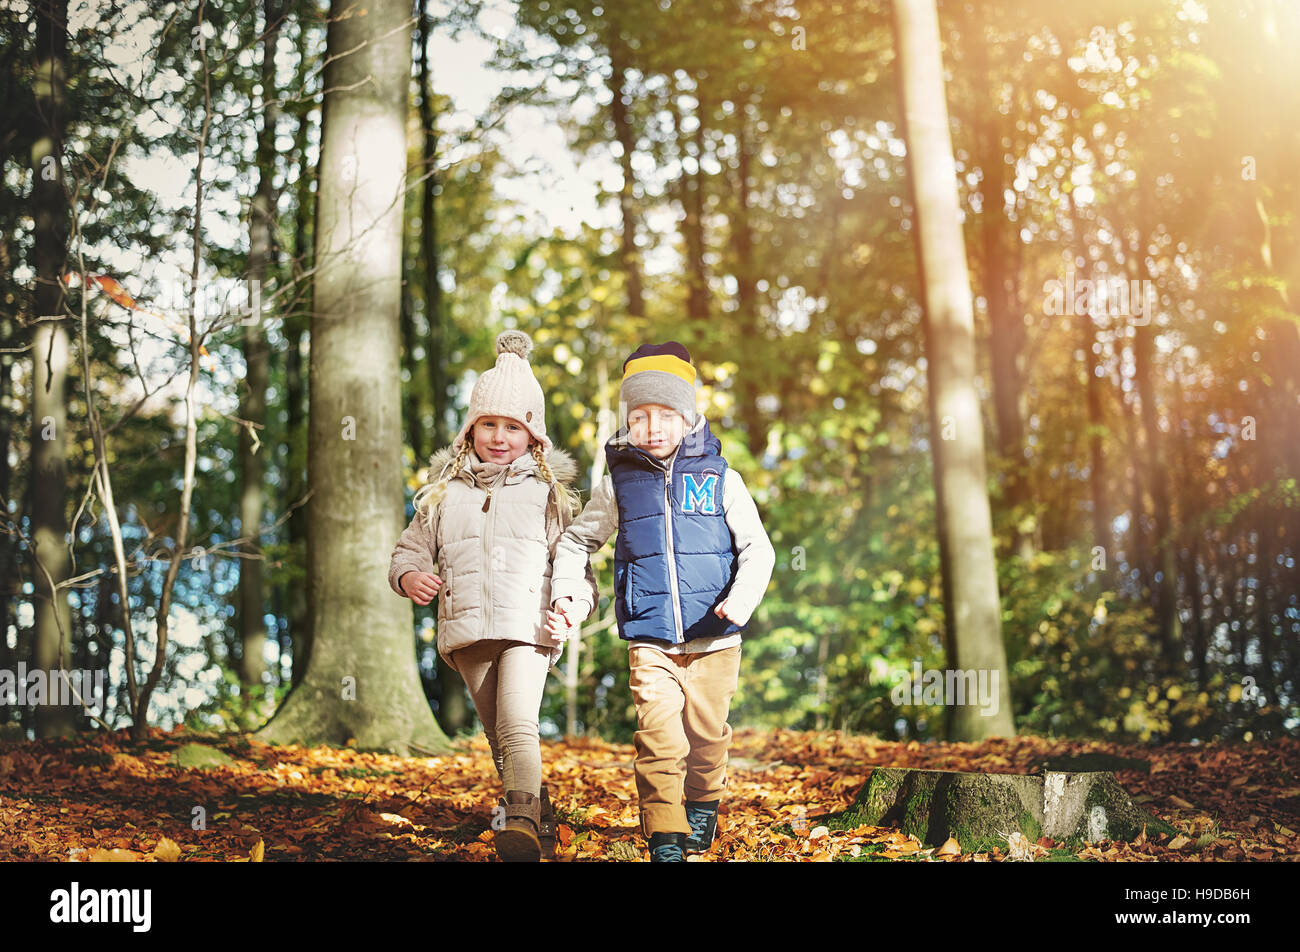 A pair of happy kids in autumn forest. Horizontal outdoors shot Stock Photo